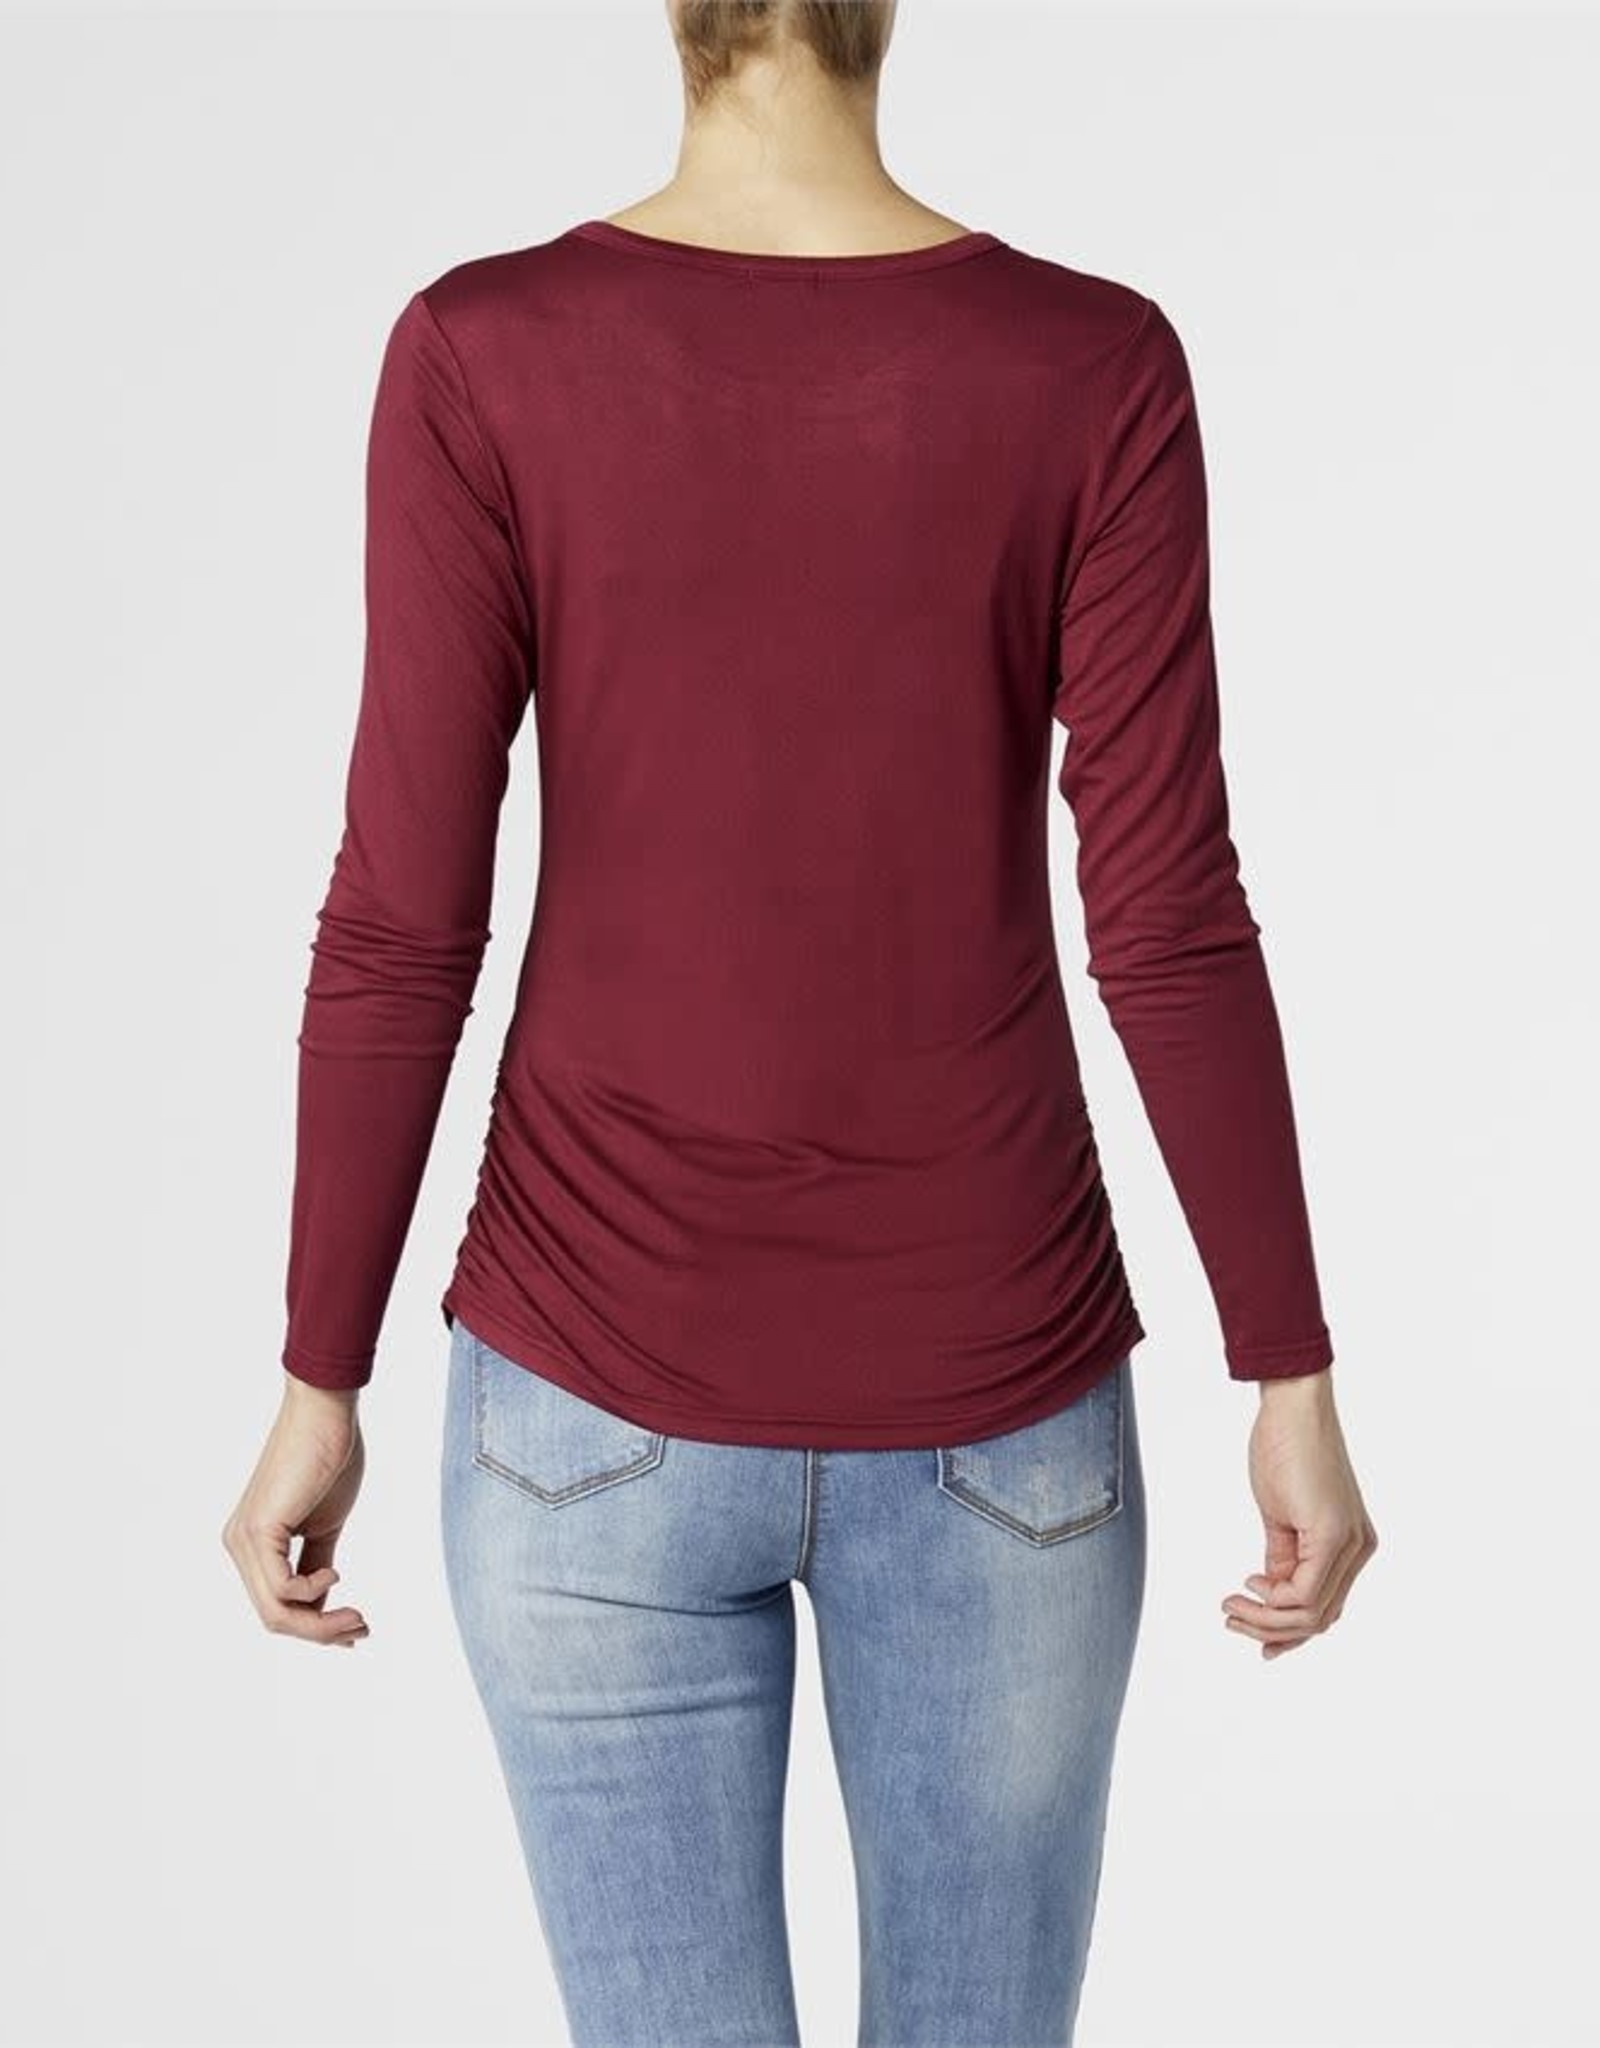 Ashley Side Cinched Long Sleeve Crew Neck Top Burgundy